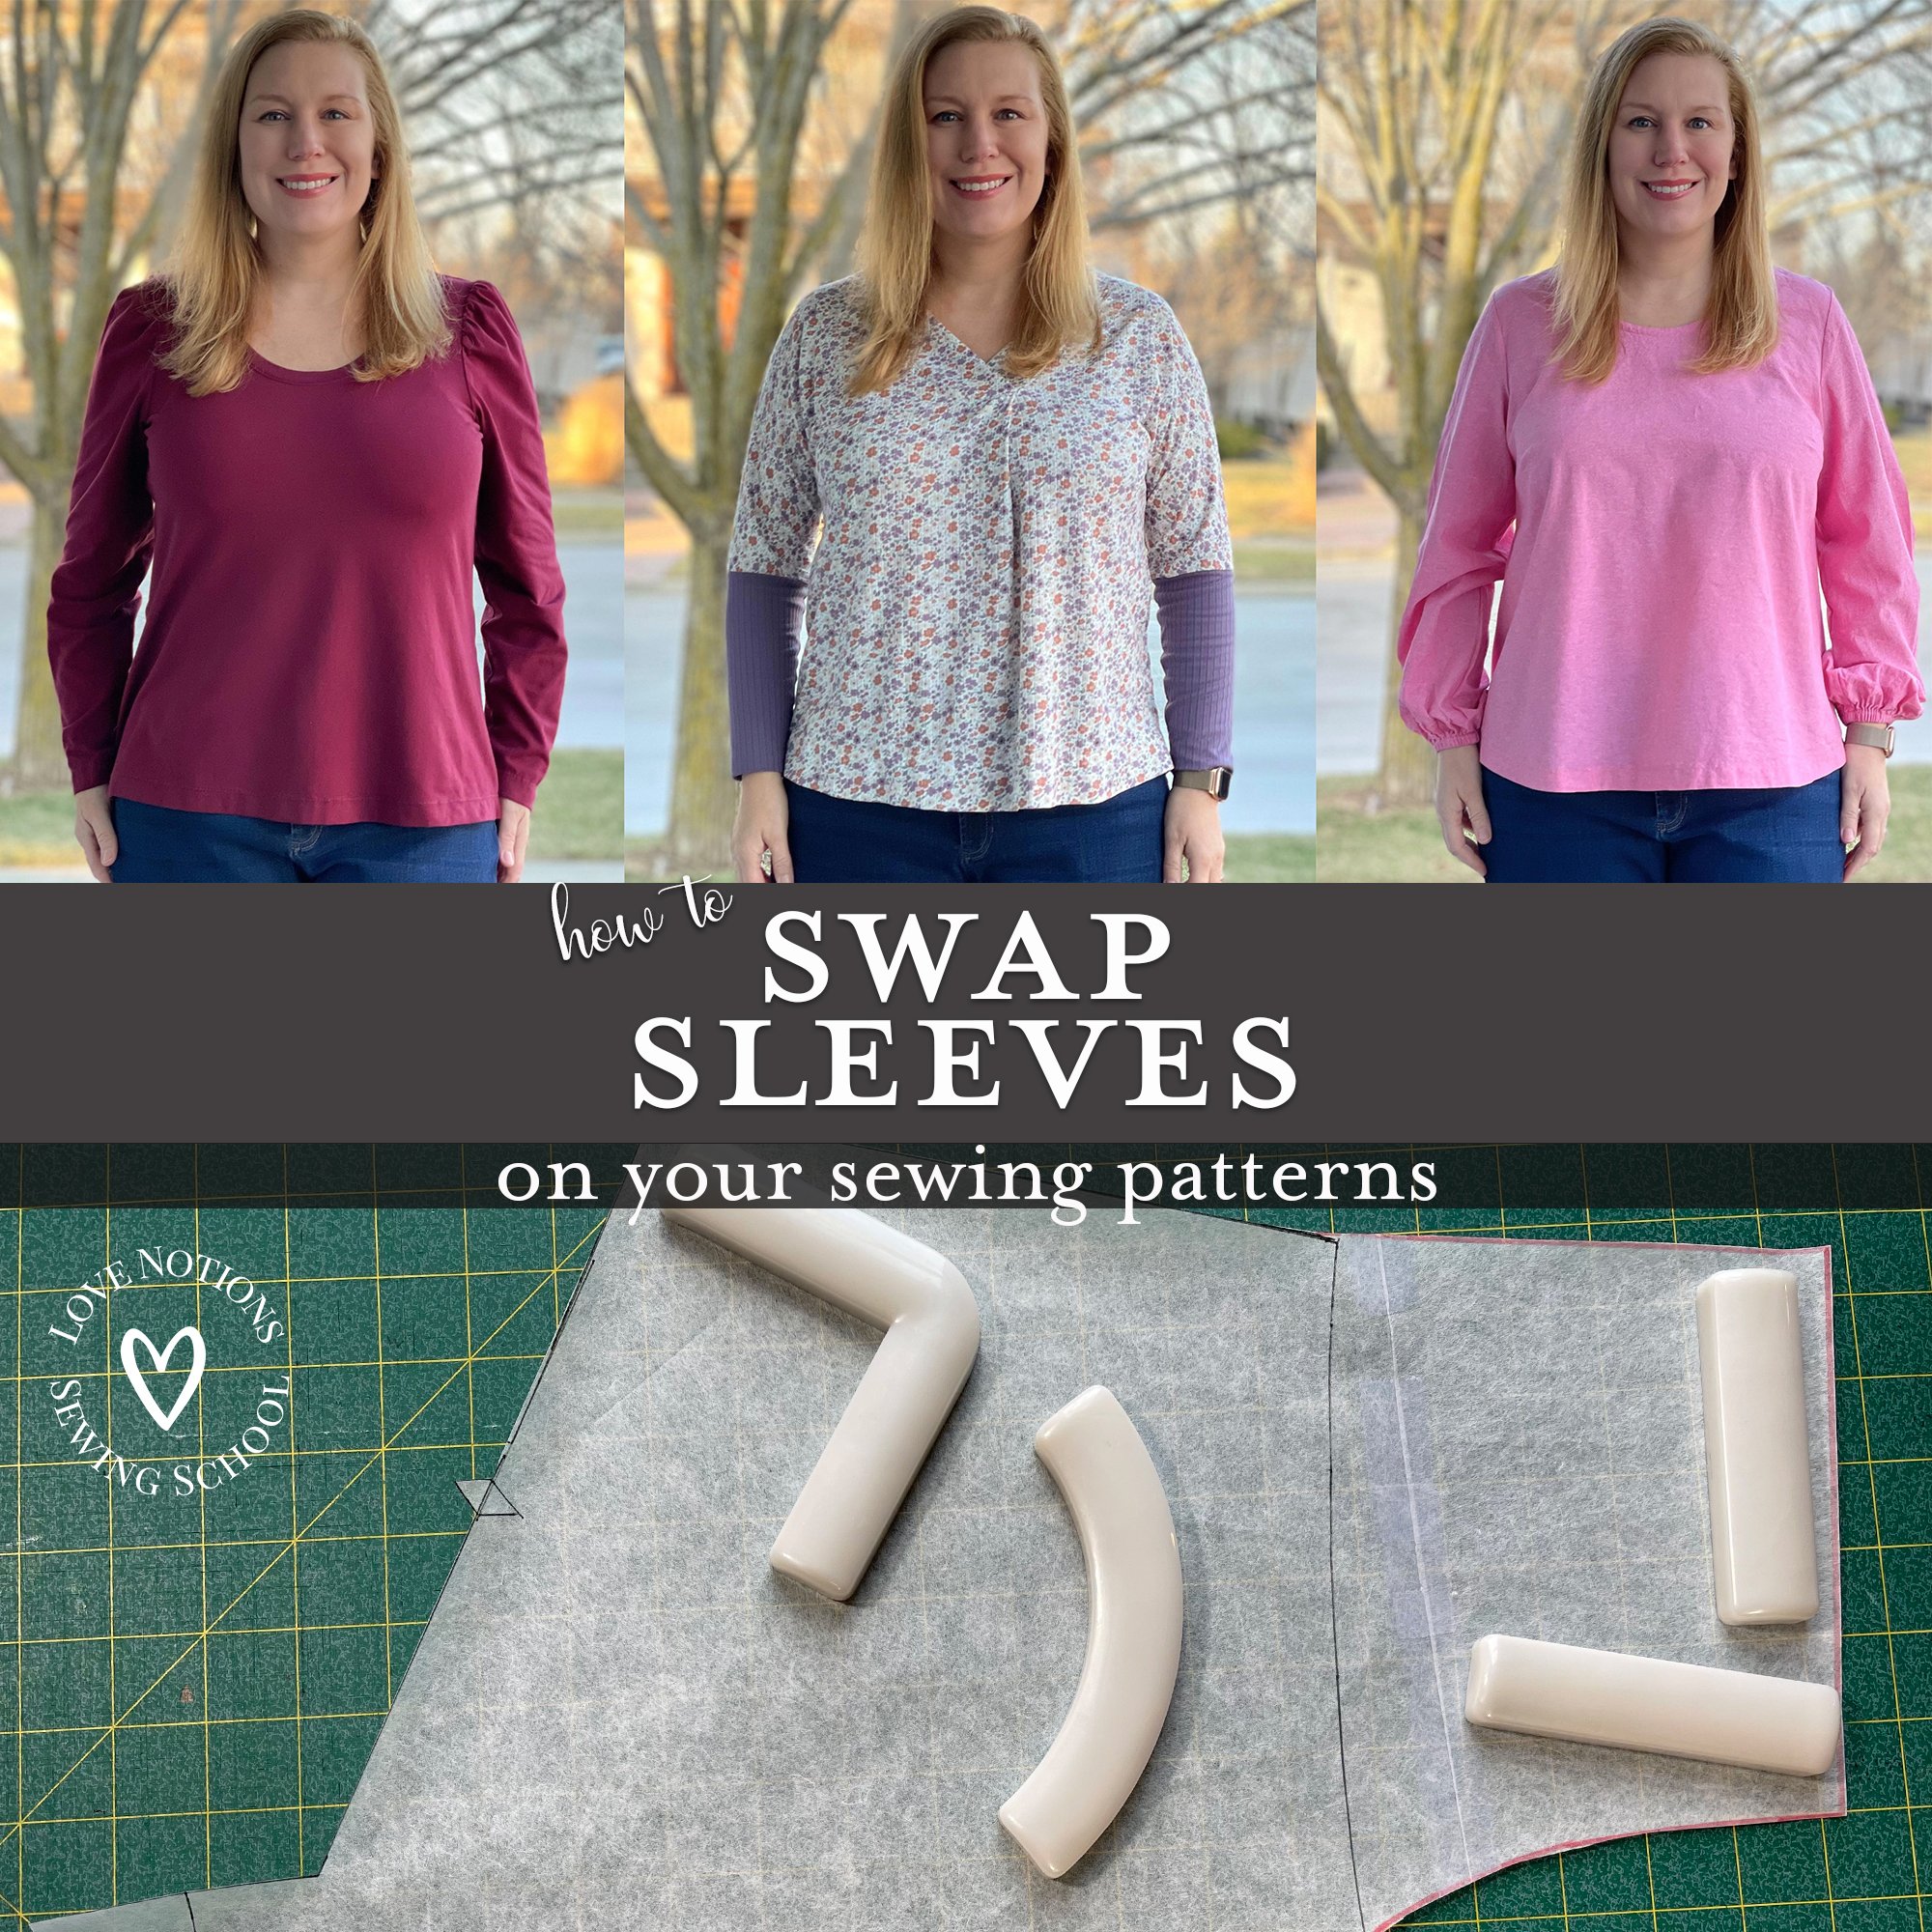 How to Swap Sleeves on Sewing Patterns